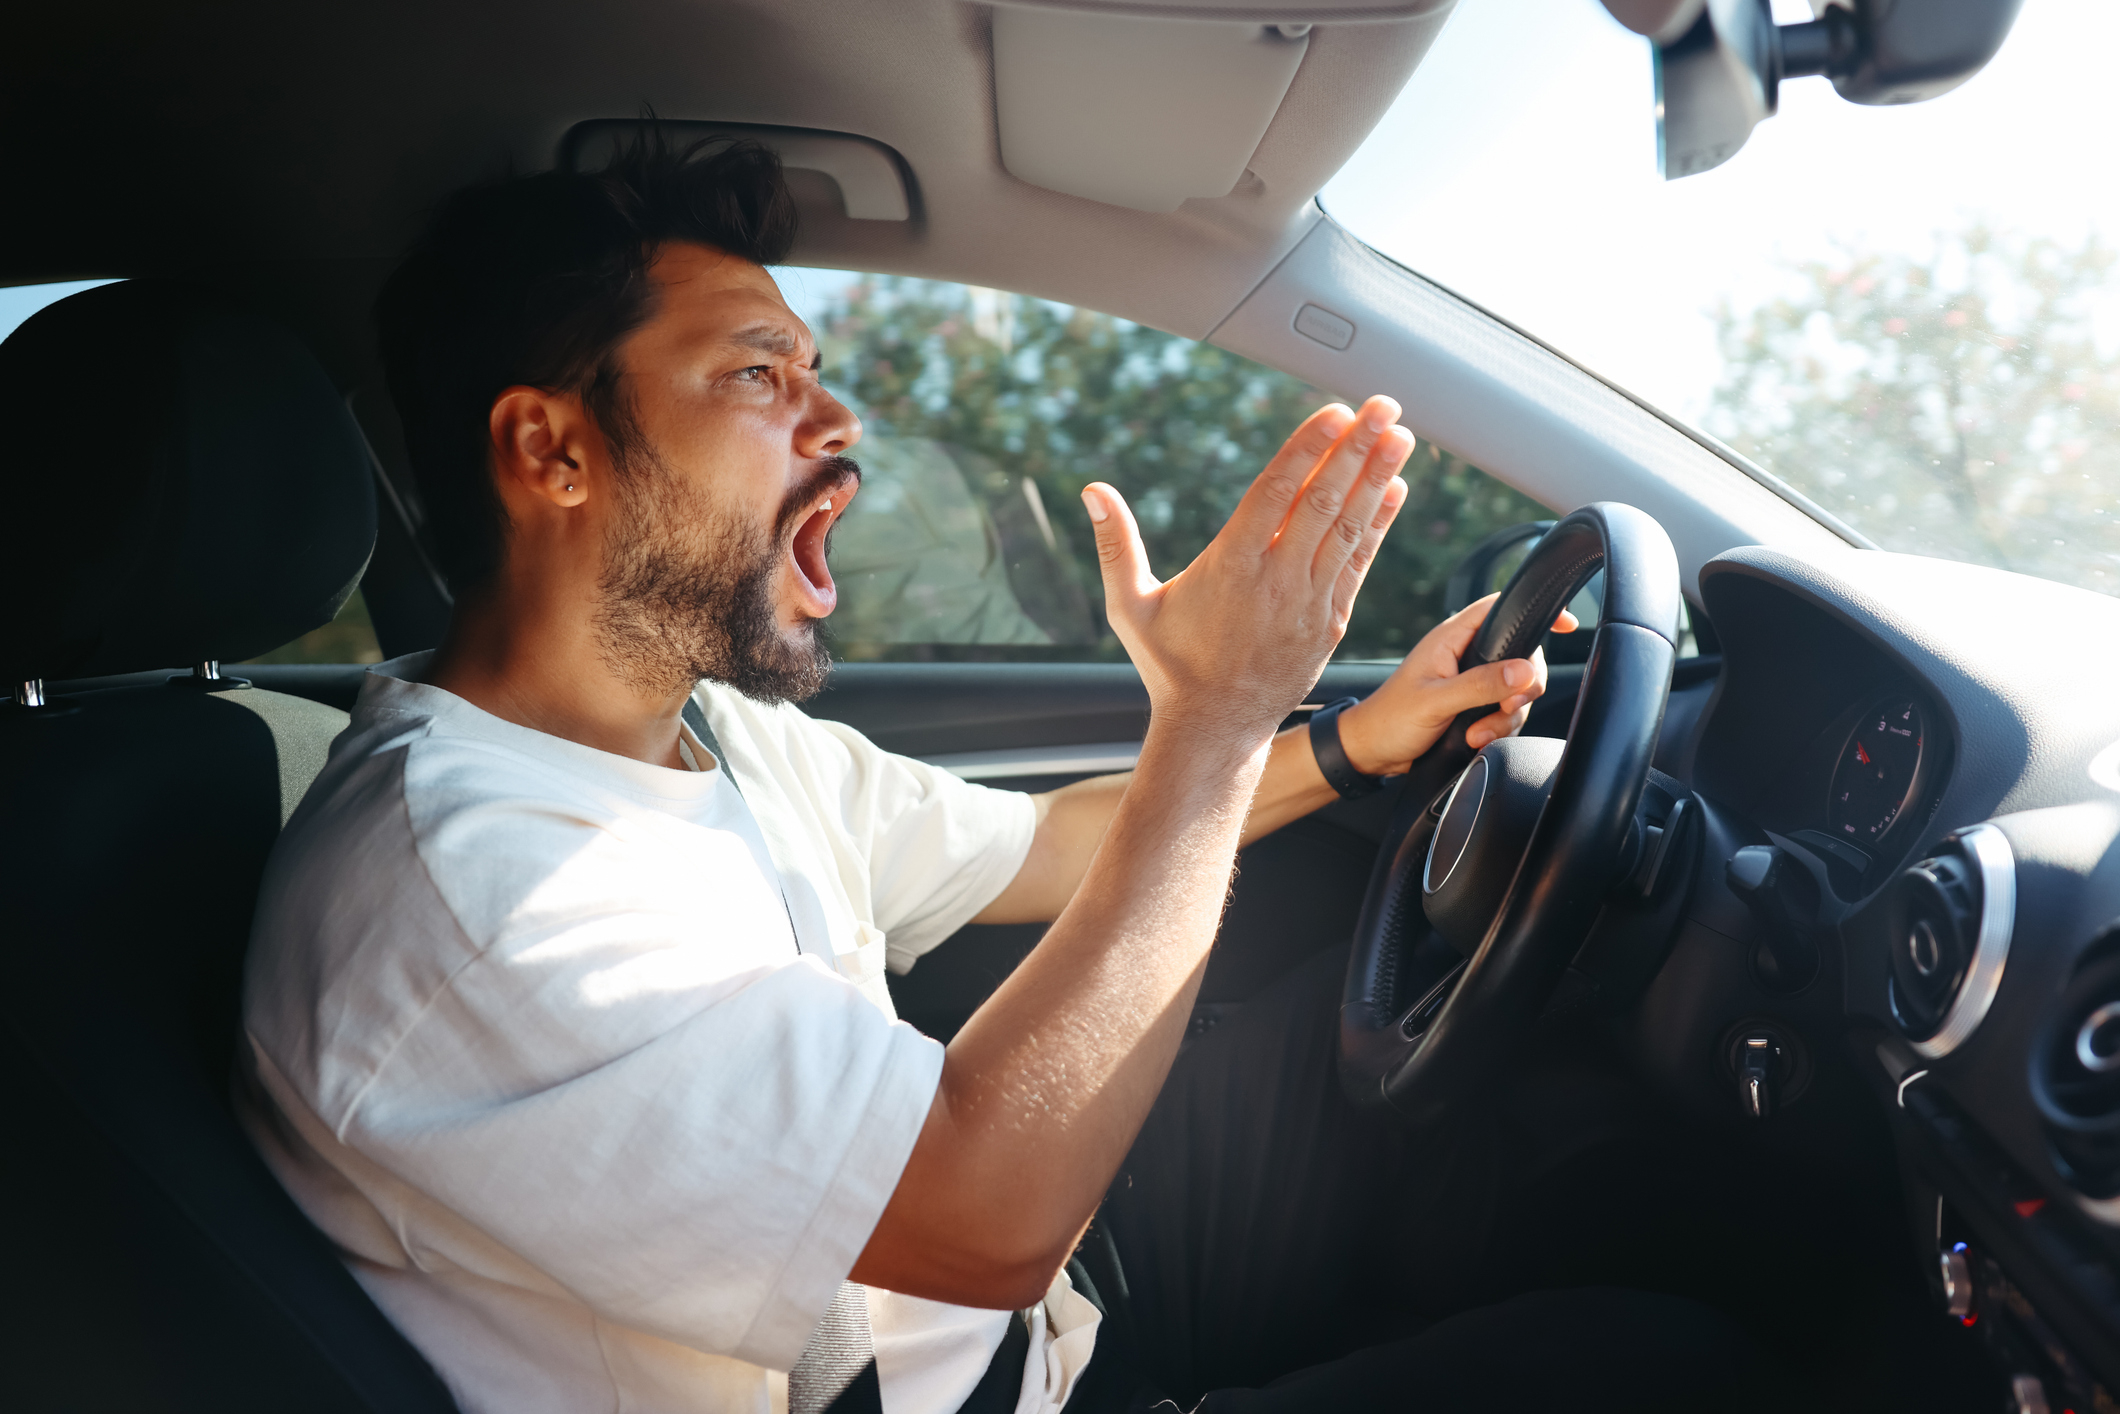 Man driving a car and gesturing angrily